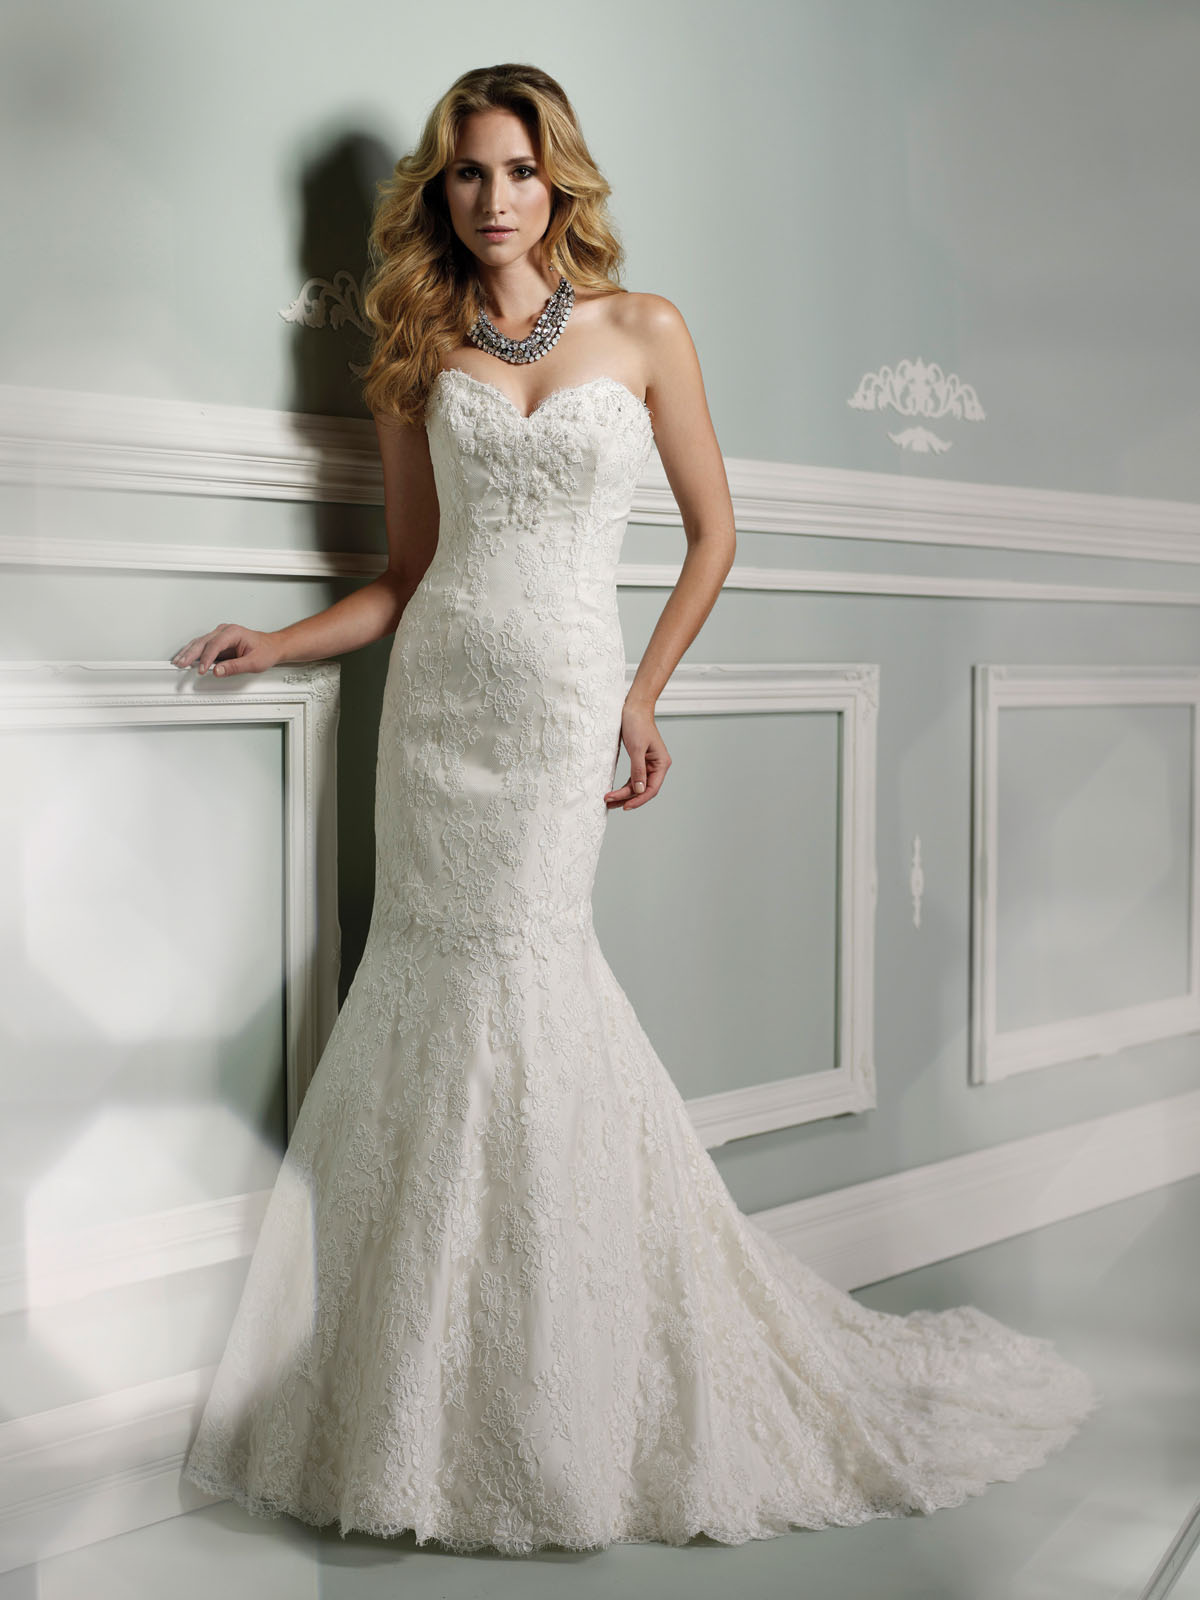 Great Lace Top Wedding Dress in the world Don t miss out 